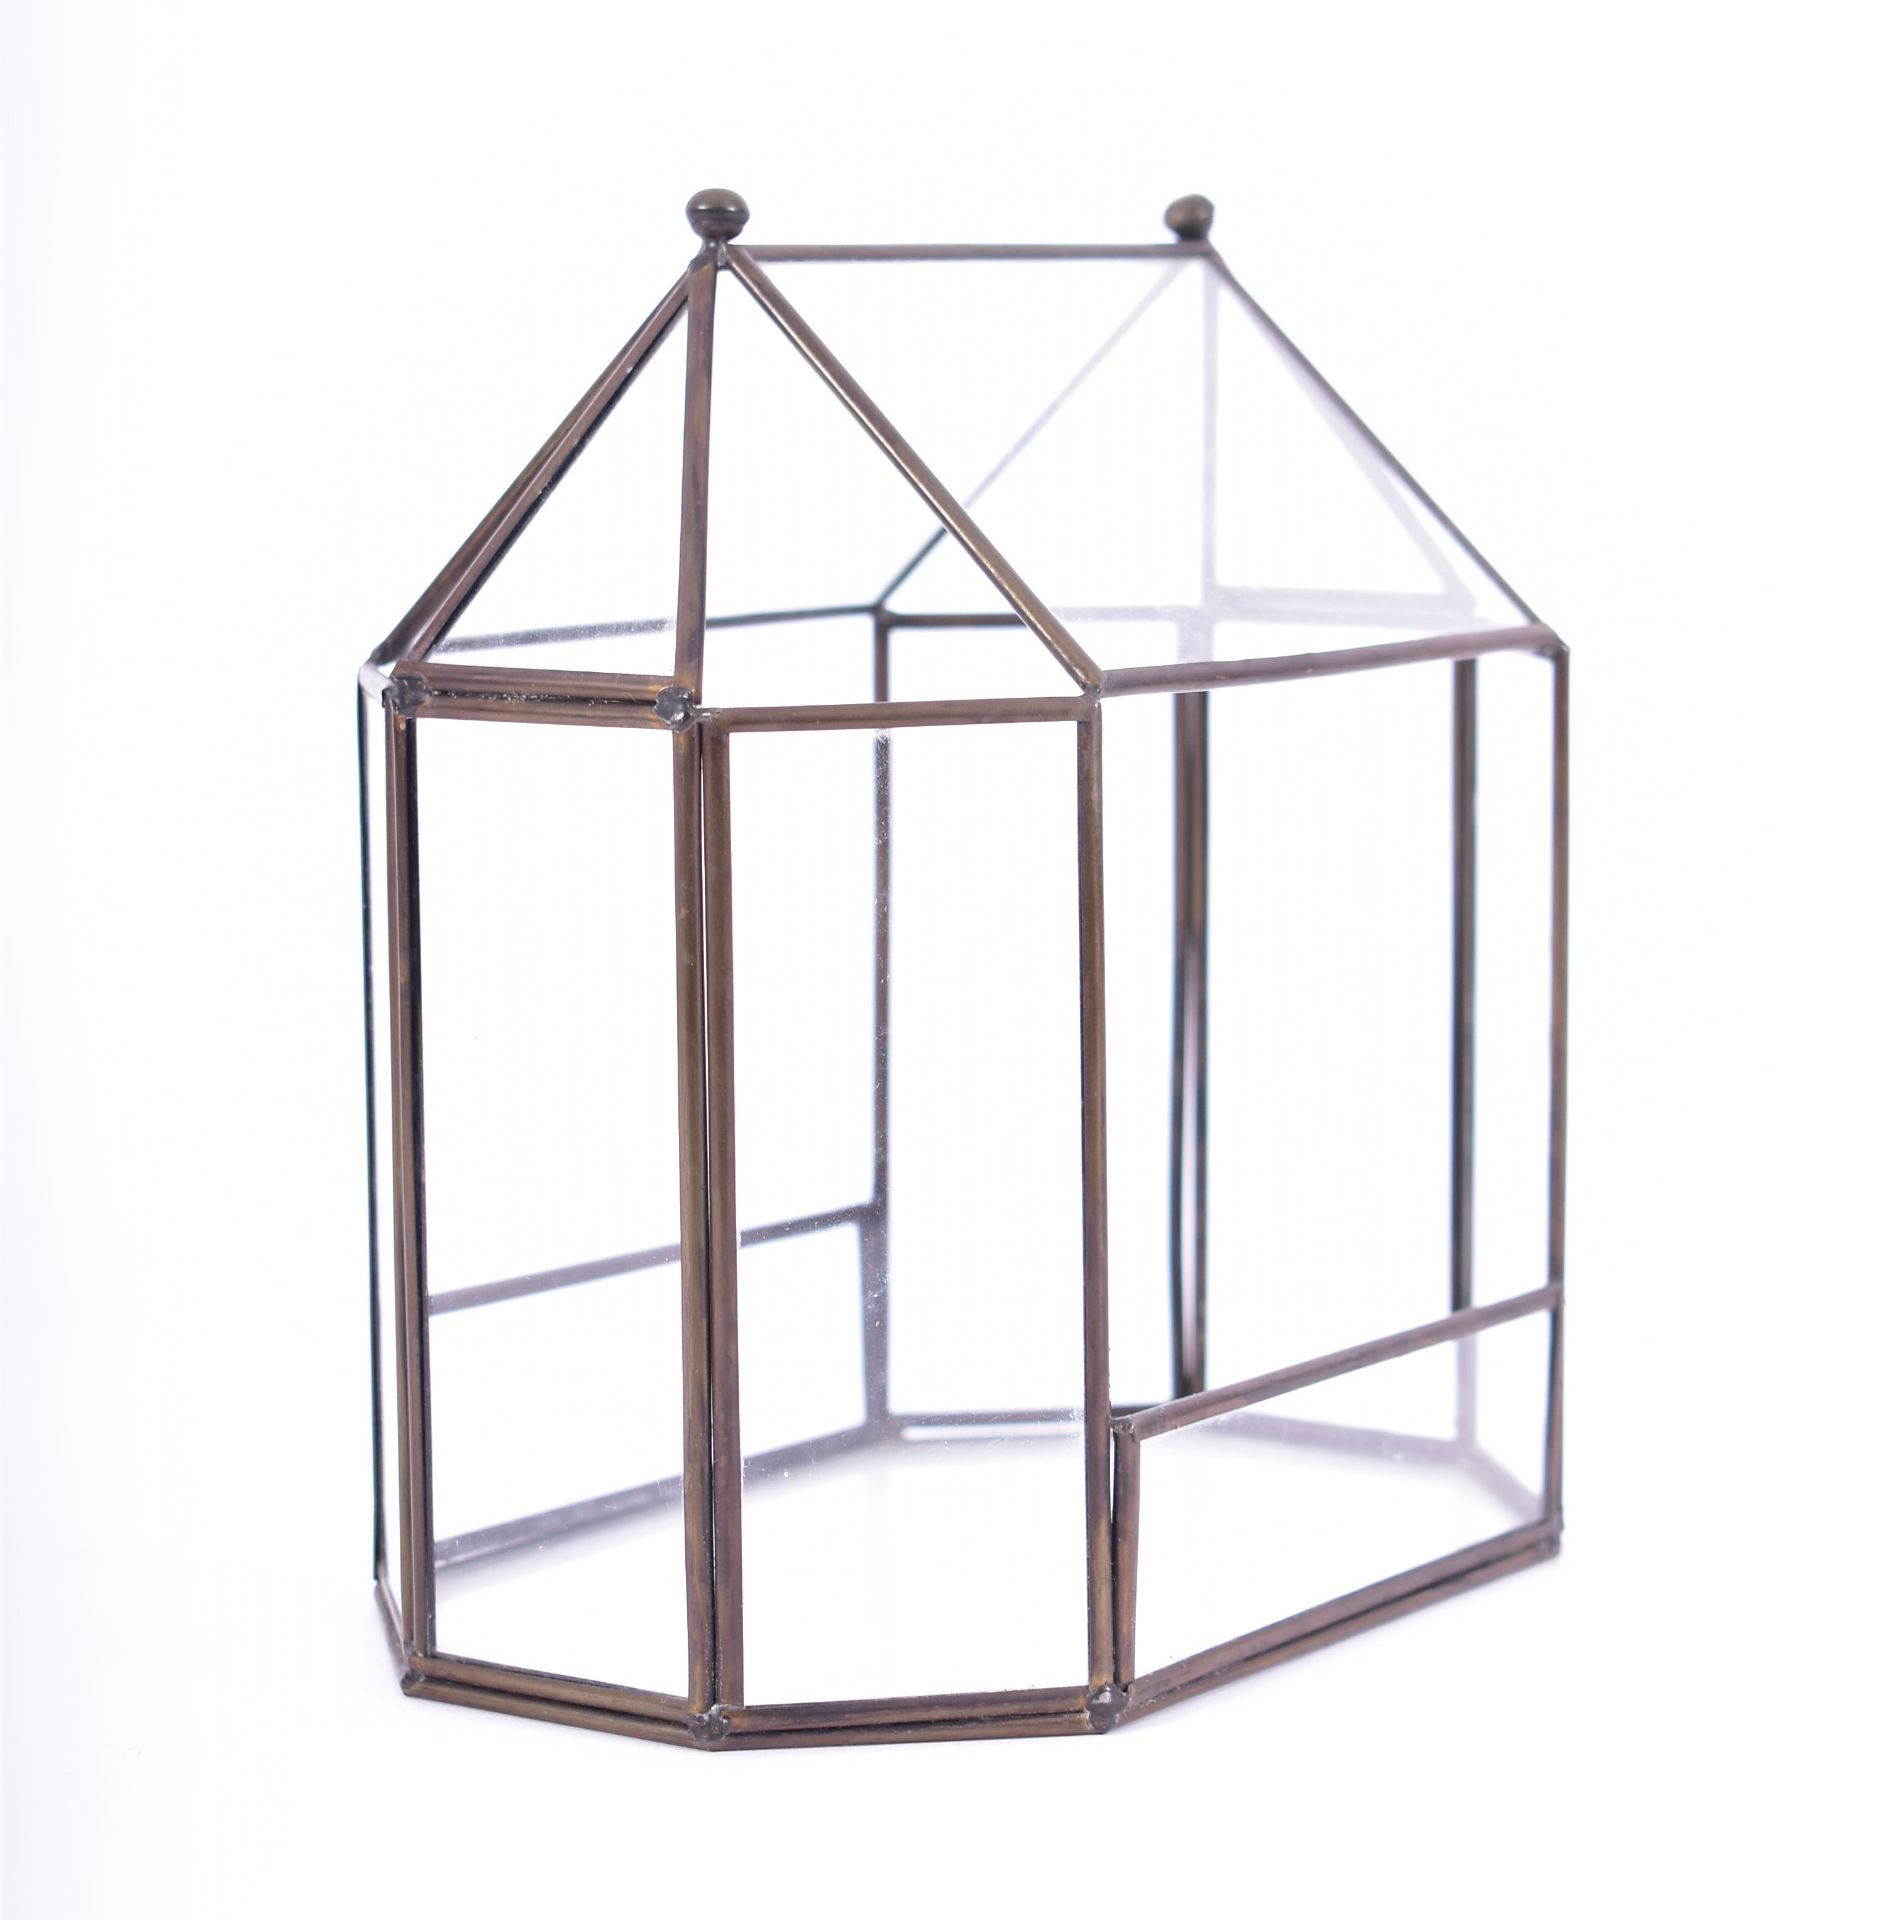 COLLECTION OF FIVE GLASS TERRARIUMS / ATRIUMS - Image 9 of 11